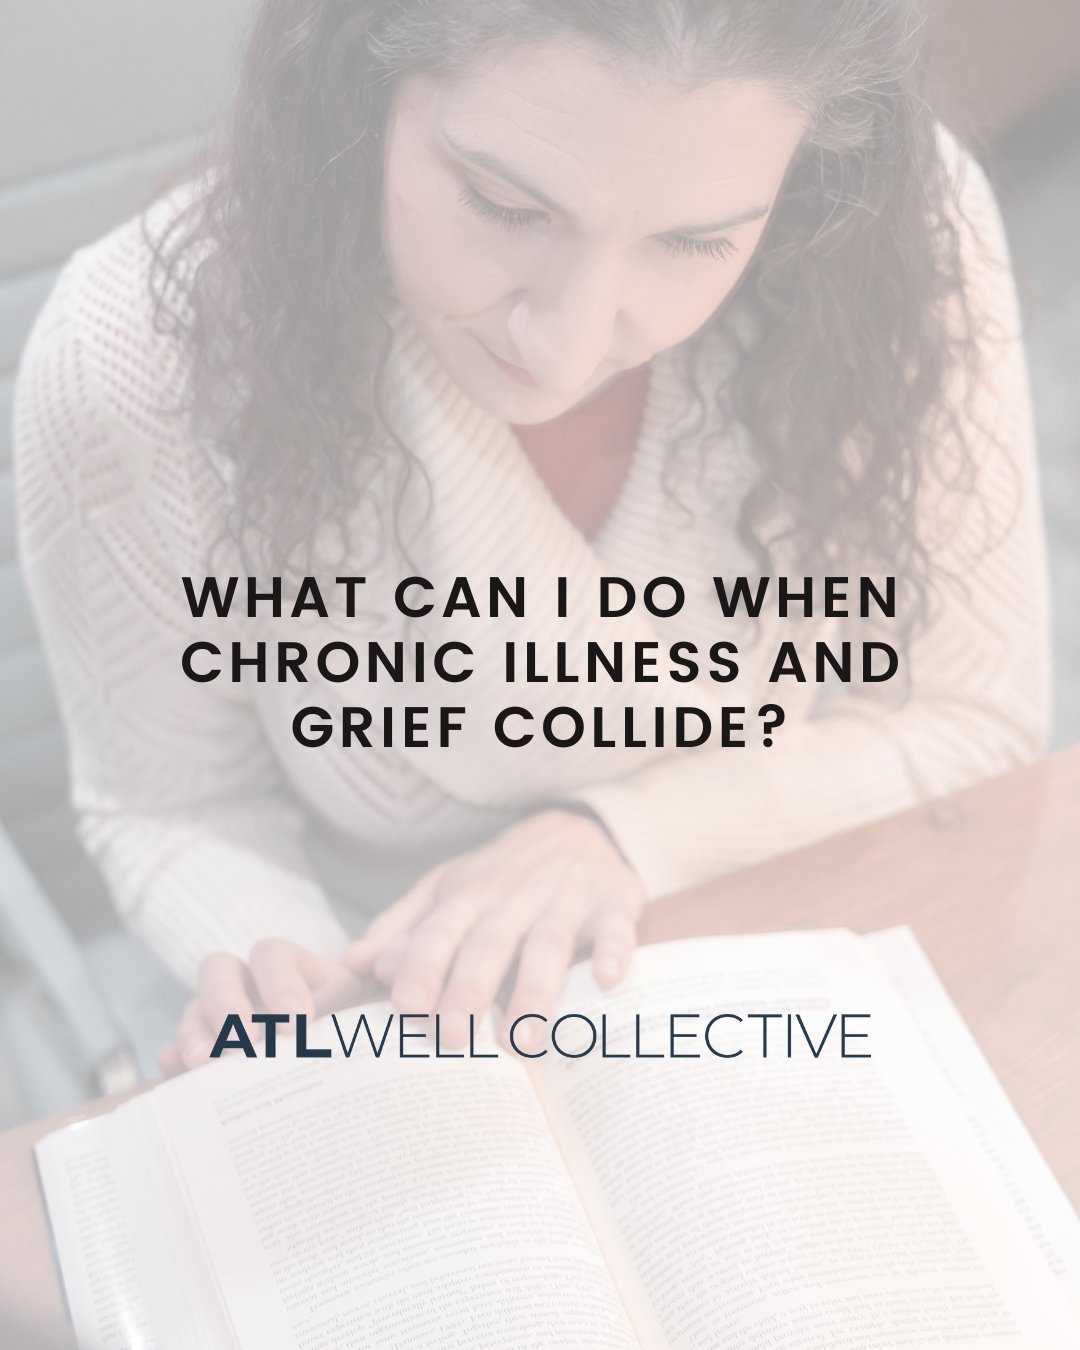 ON THE BLOG - When Chronic Illness and Greif Collide by Elizabeth Neal, LMSW.

Visit our blog - - Elizabeth gives an overview of the 5 steps of grief through the lens of chronic illness.

Go to atlwell.com/blog &mdash; or use the link in our bio to r